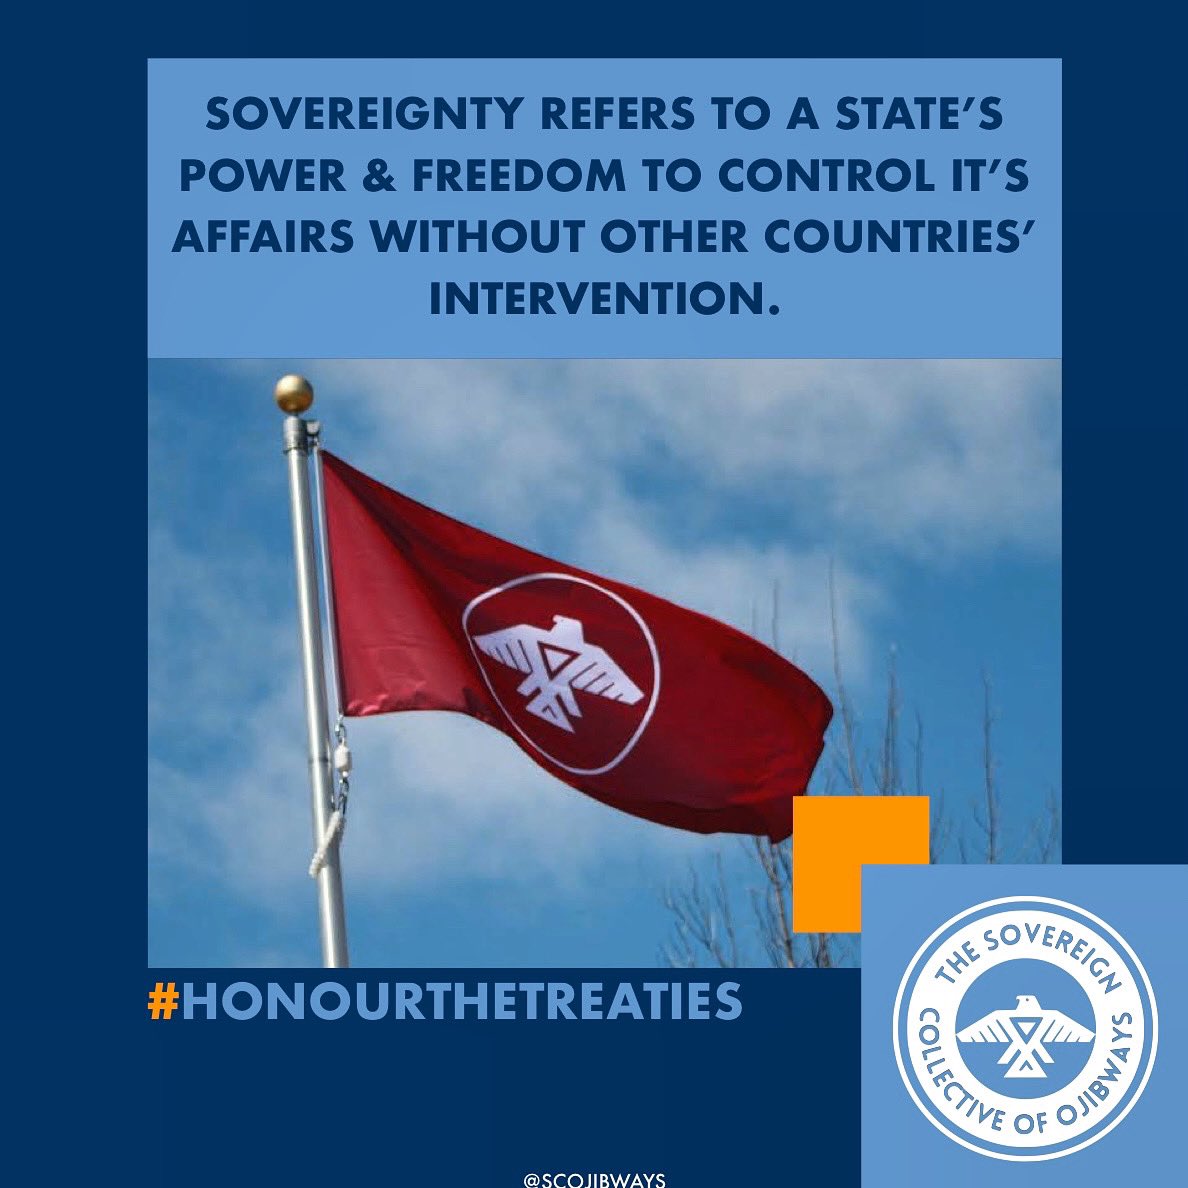 🔋✅ — Sovereignty refers to a state’s power & freedom to control it’s affairs without other countries’ intervention. #HonourTheTreaties #Sovereignty #Decolonize